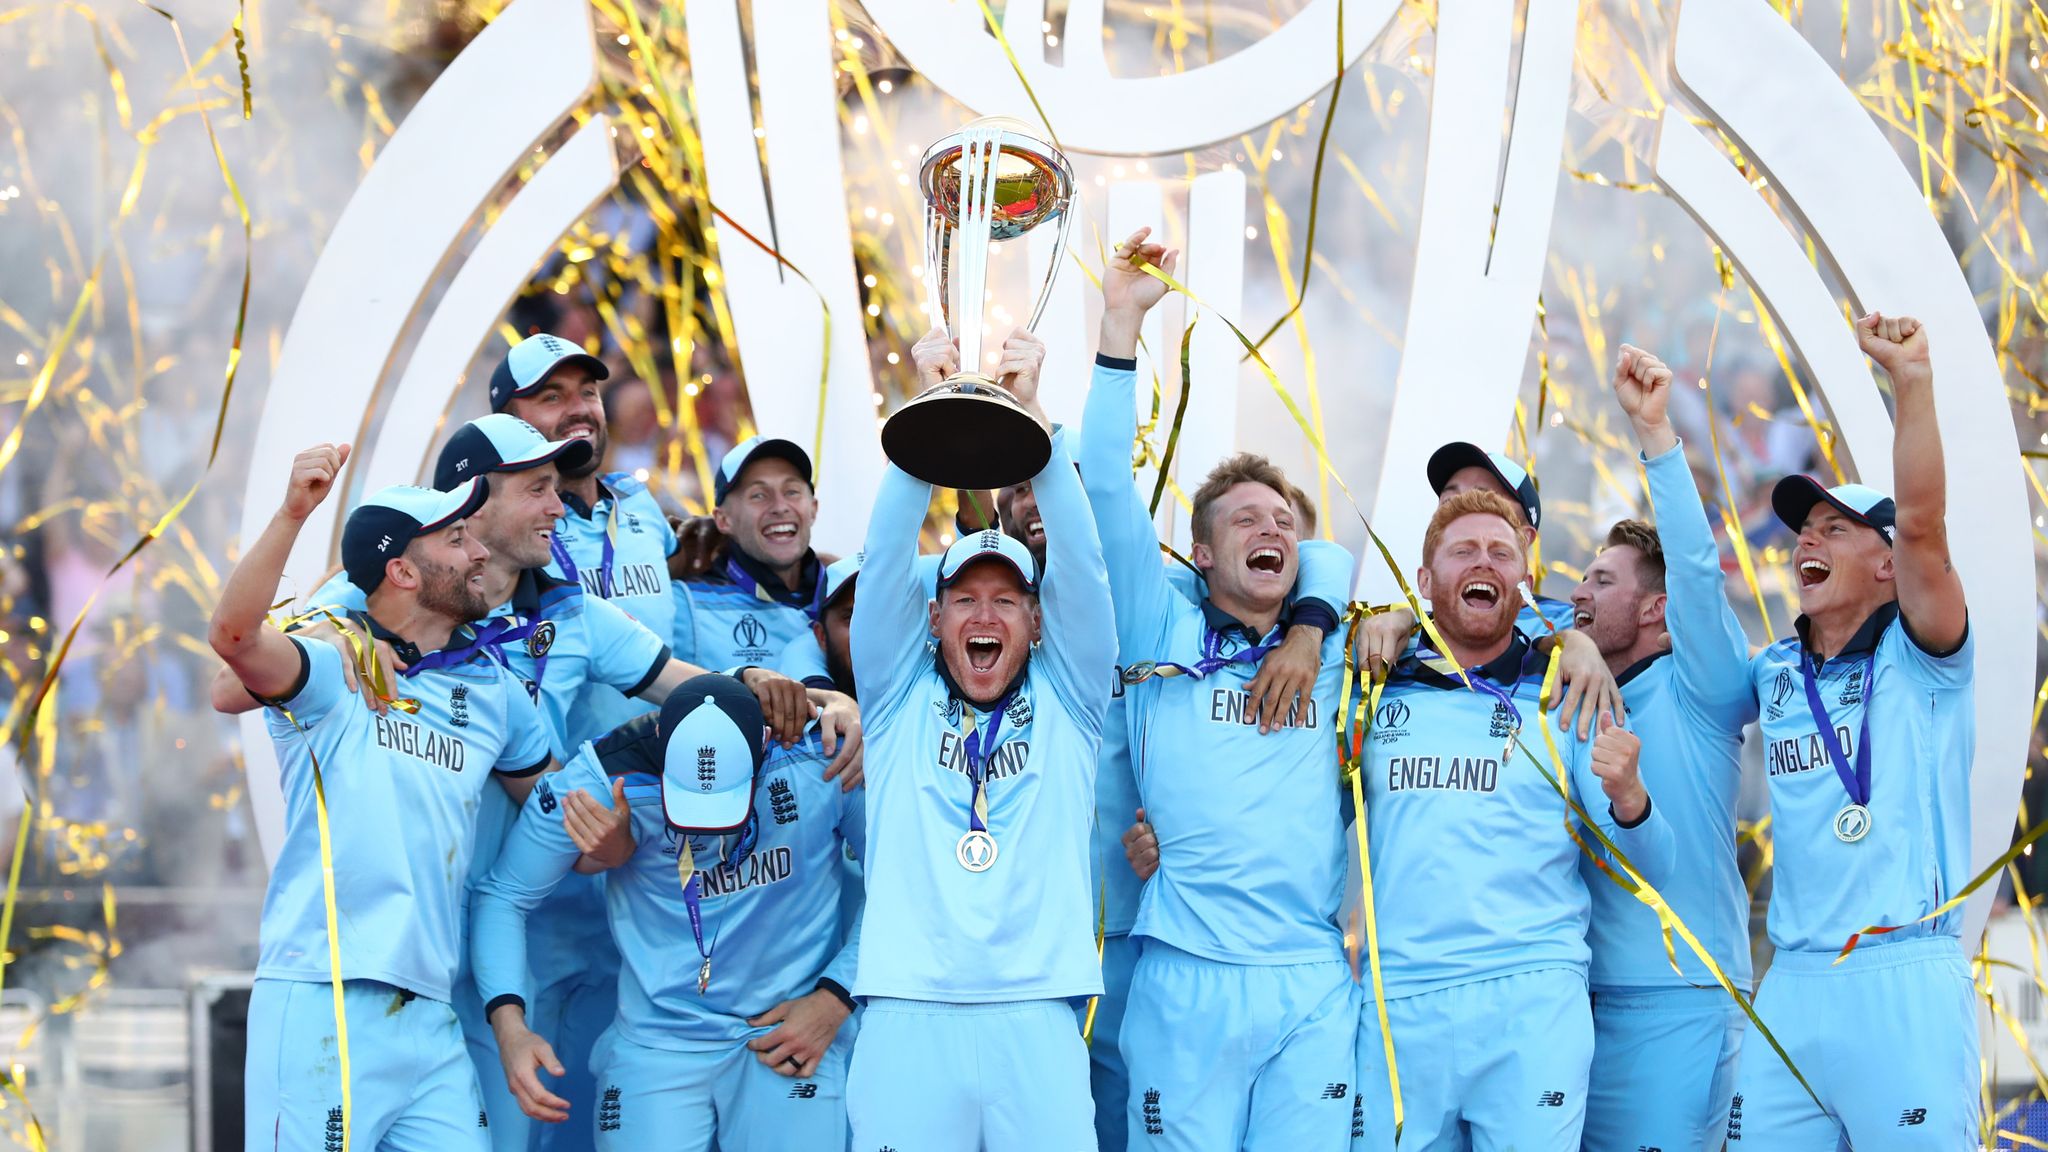 England's cricket World Cup winners hailed heroes as they celebrate